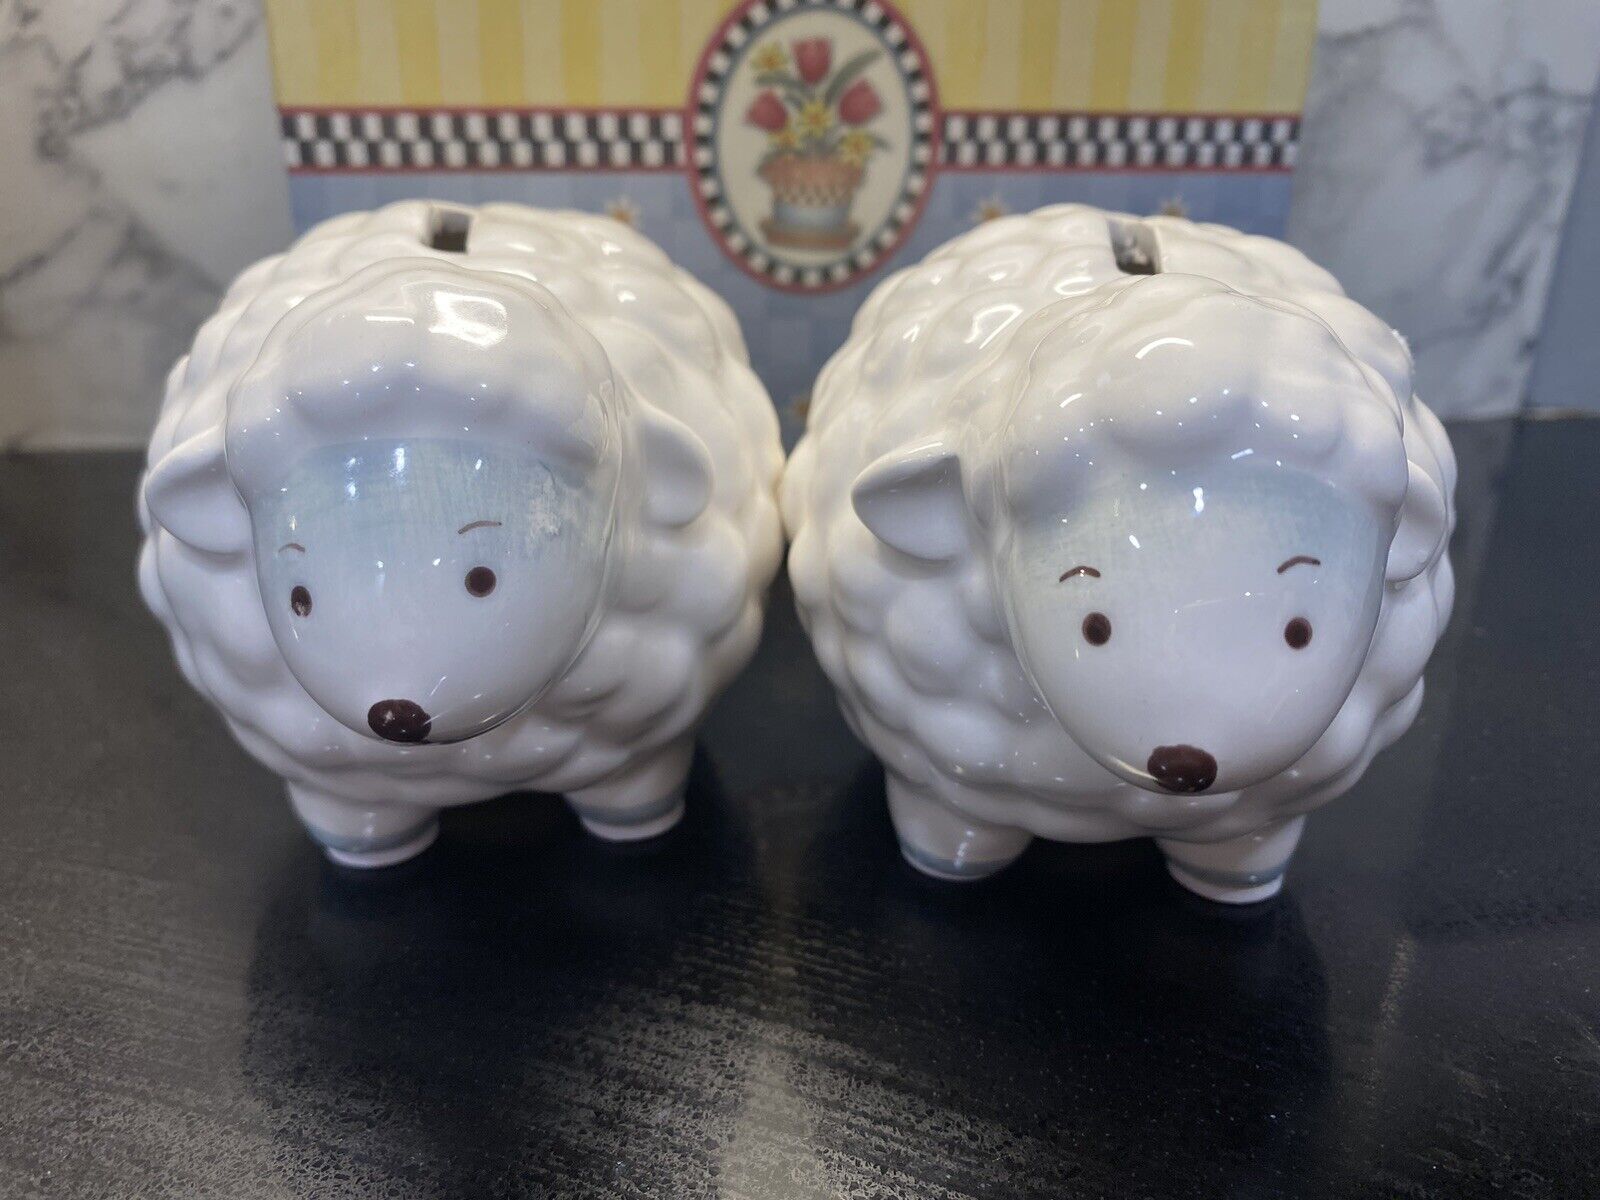 Child To Cherish Lamb / Sheep Baby Bank Set Of 2 New W/o Tags White/Blue Accent